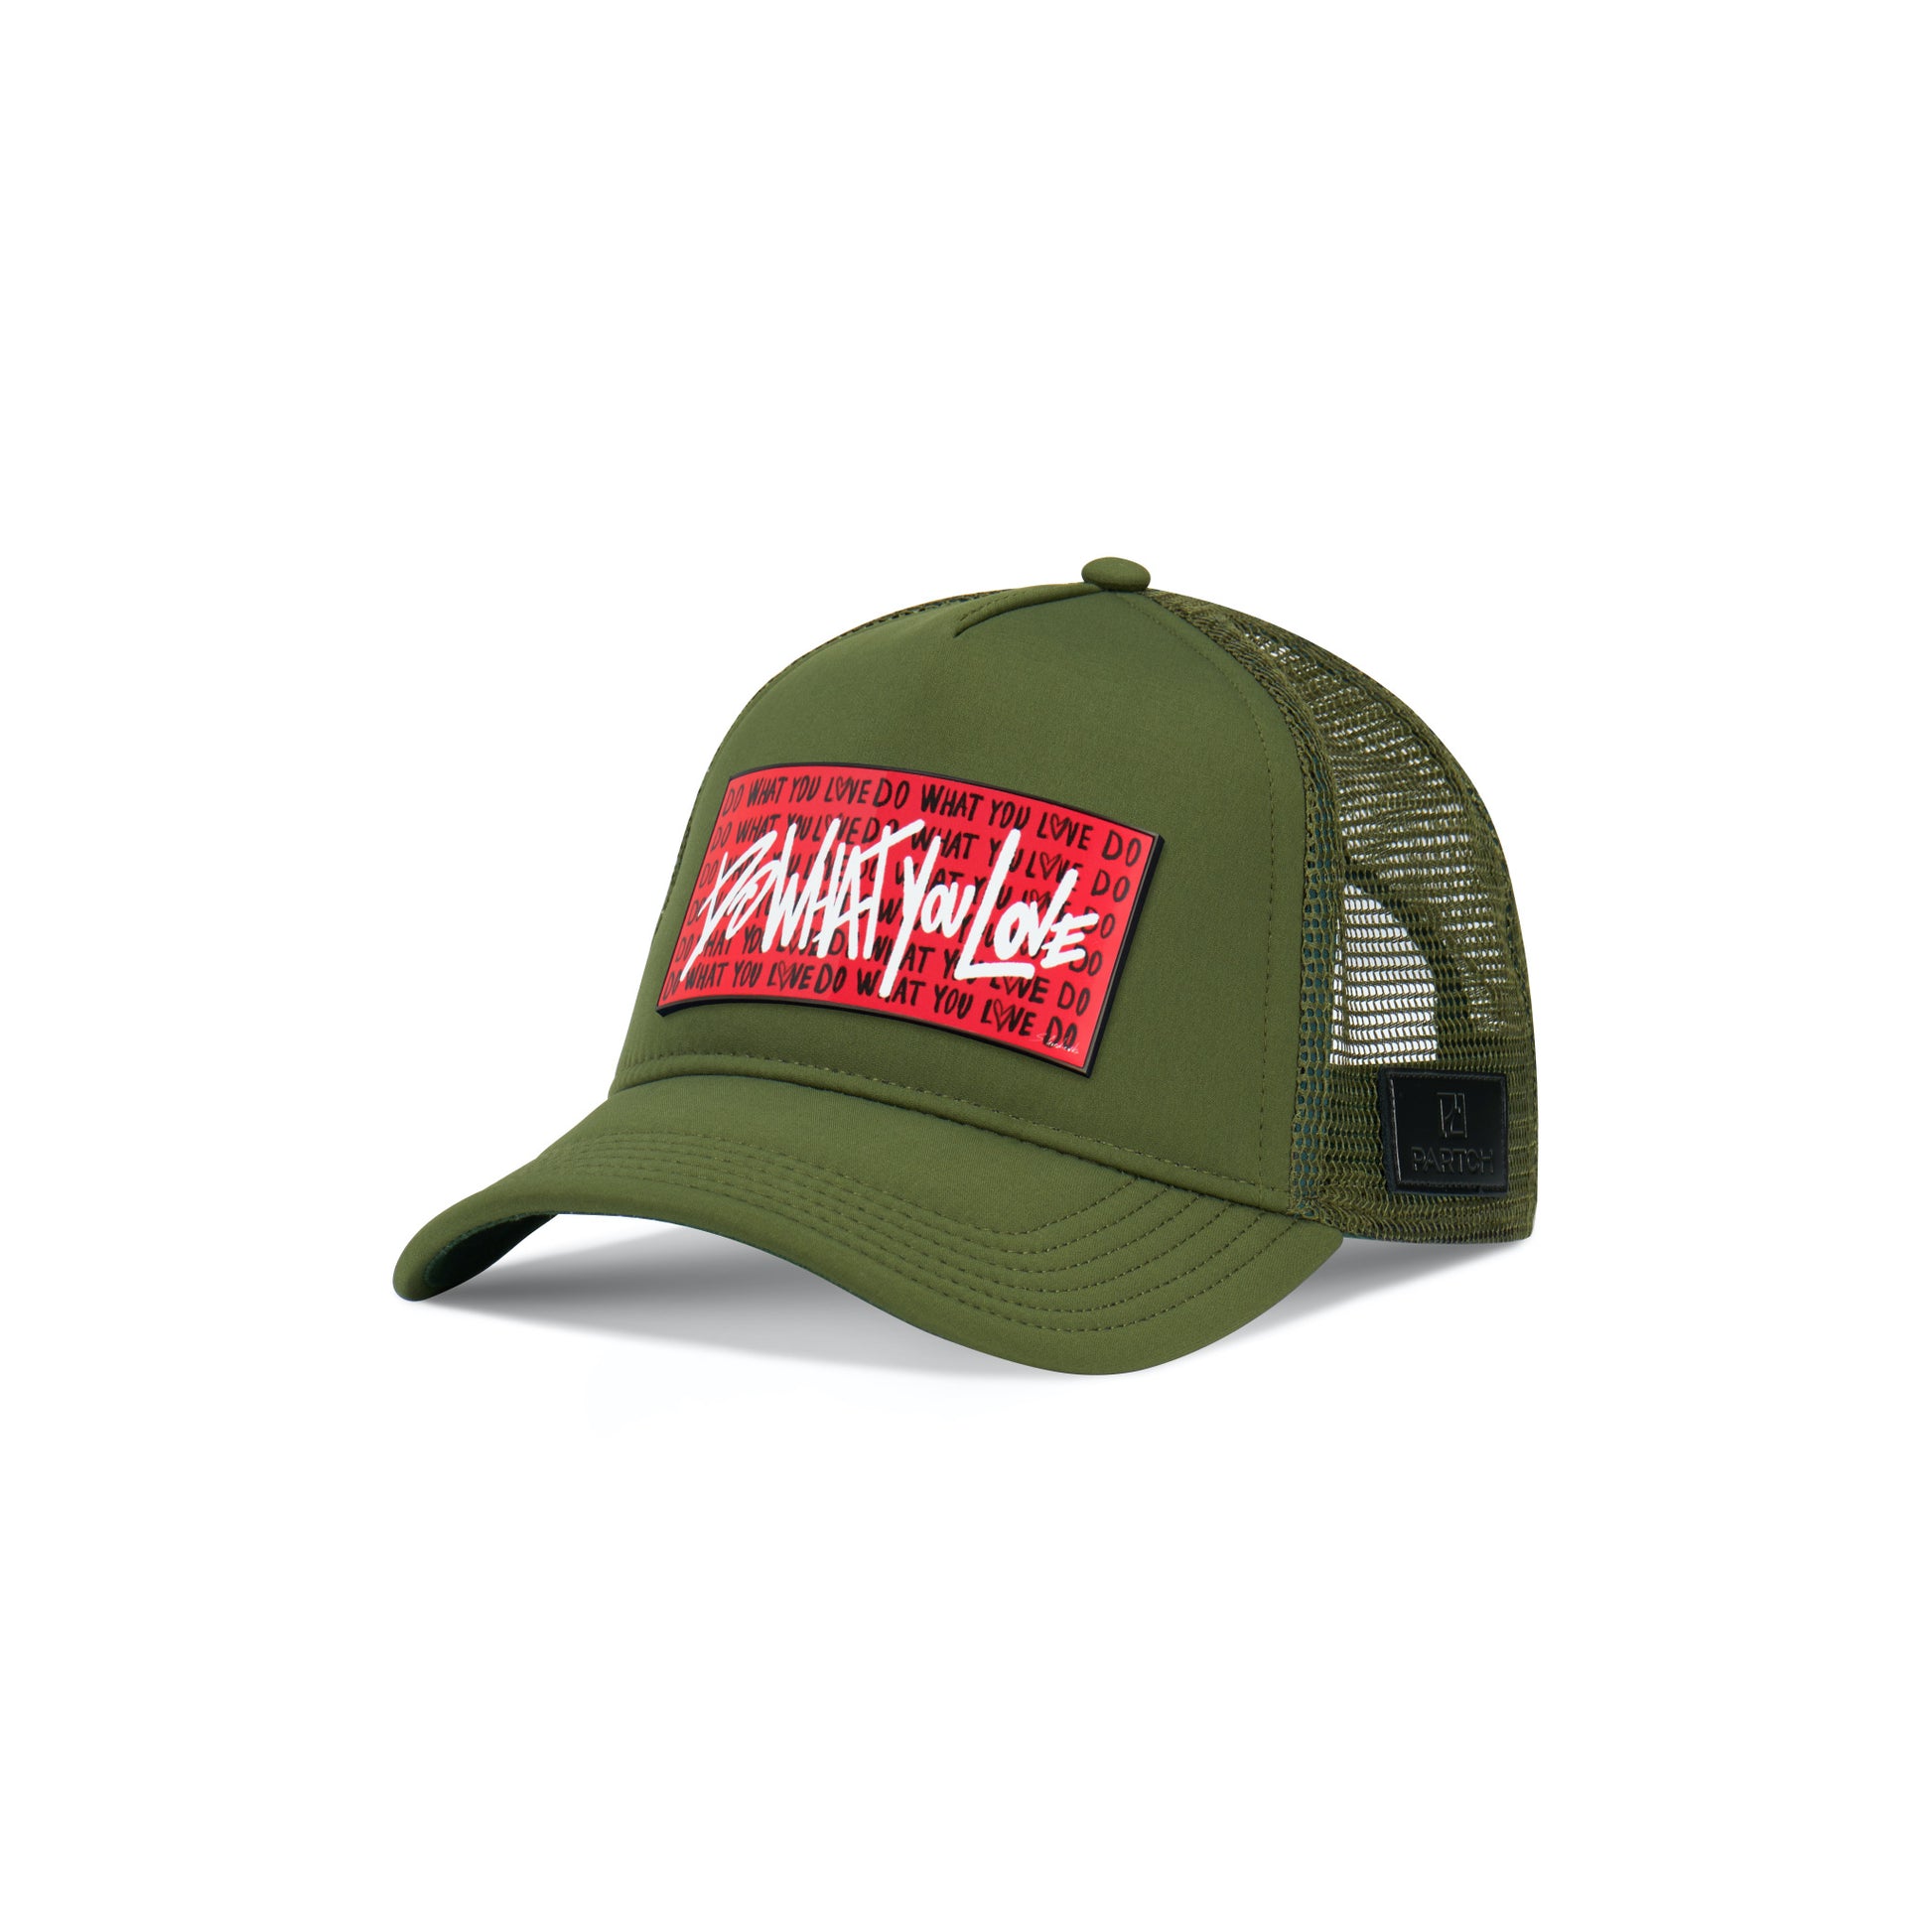 Partch Trucker hats and caps with Art front Panel patch removable | Men’s and Women’s Collection